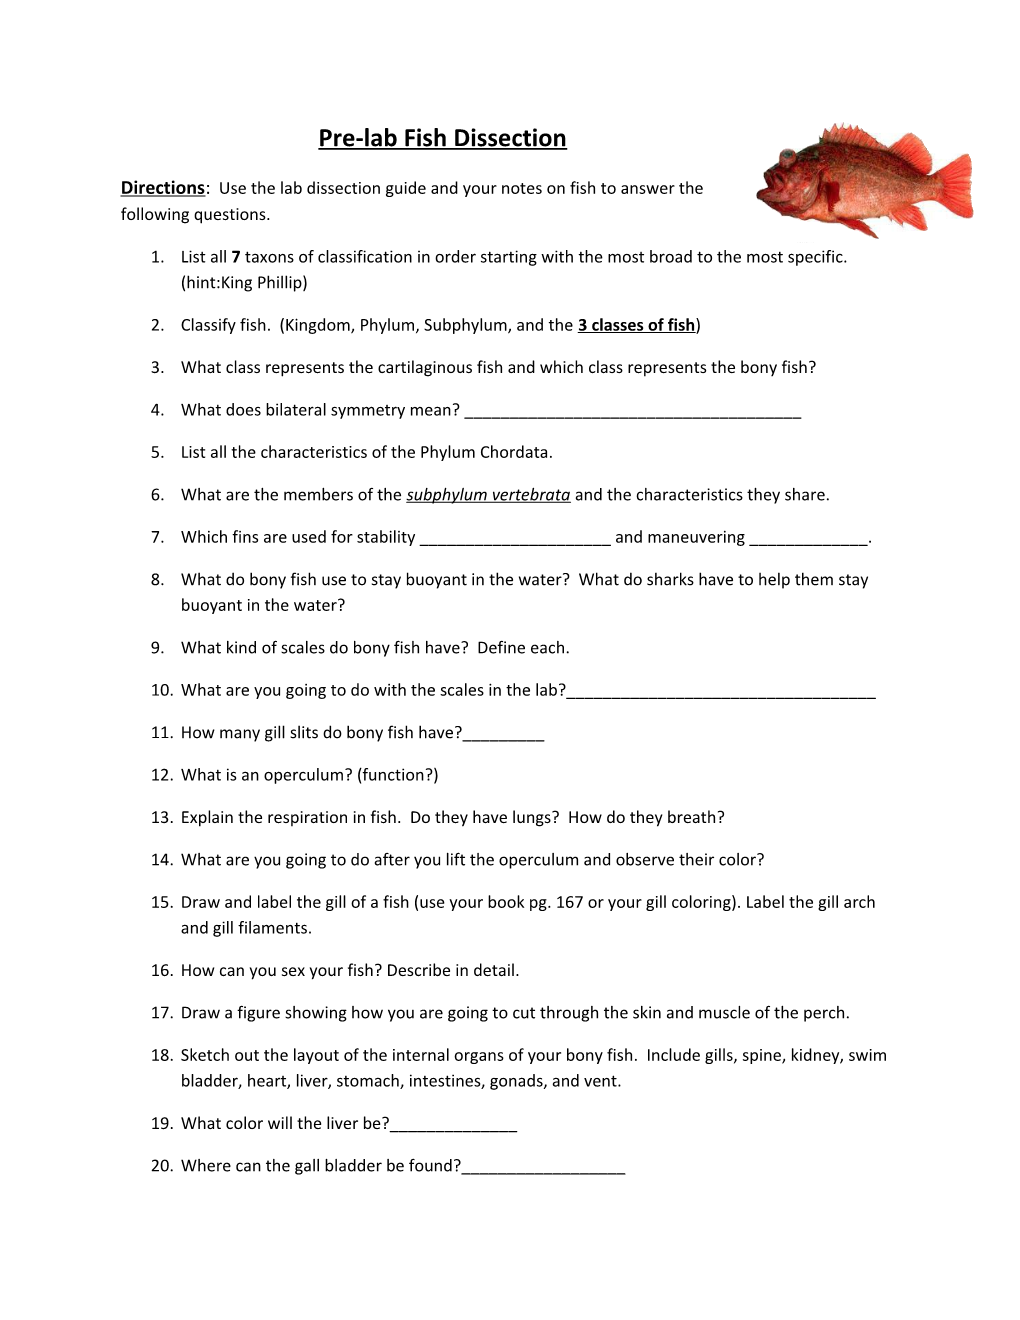 2. Classify Fish. (Kingdom, Phylum, Subphylum, and the 3 Classes of Fish )